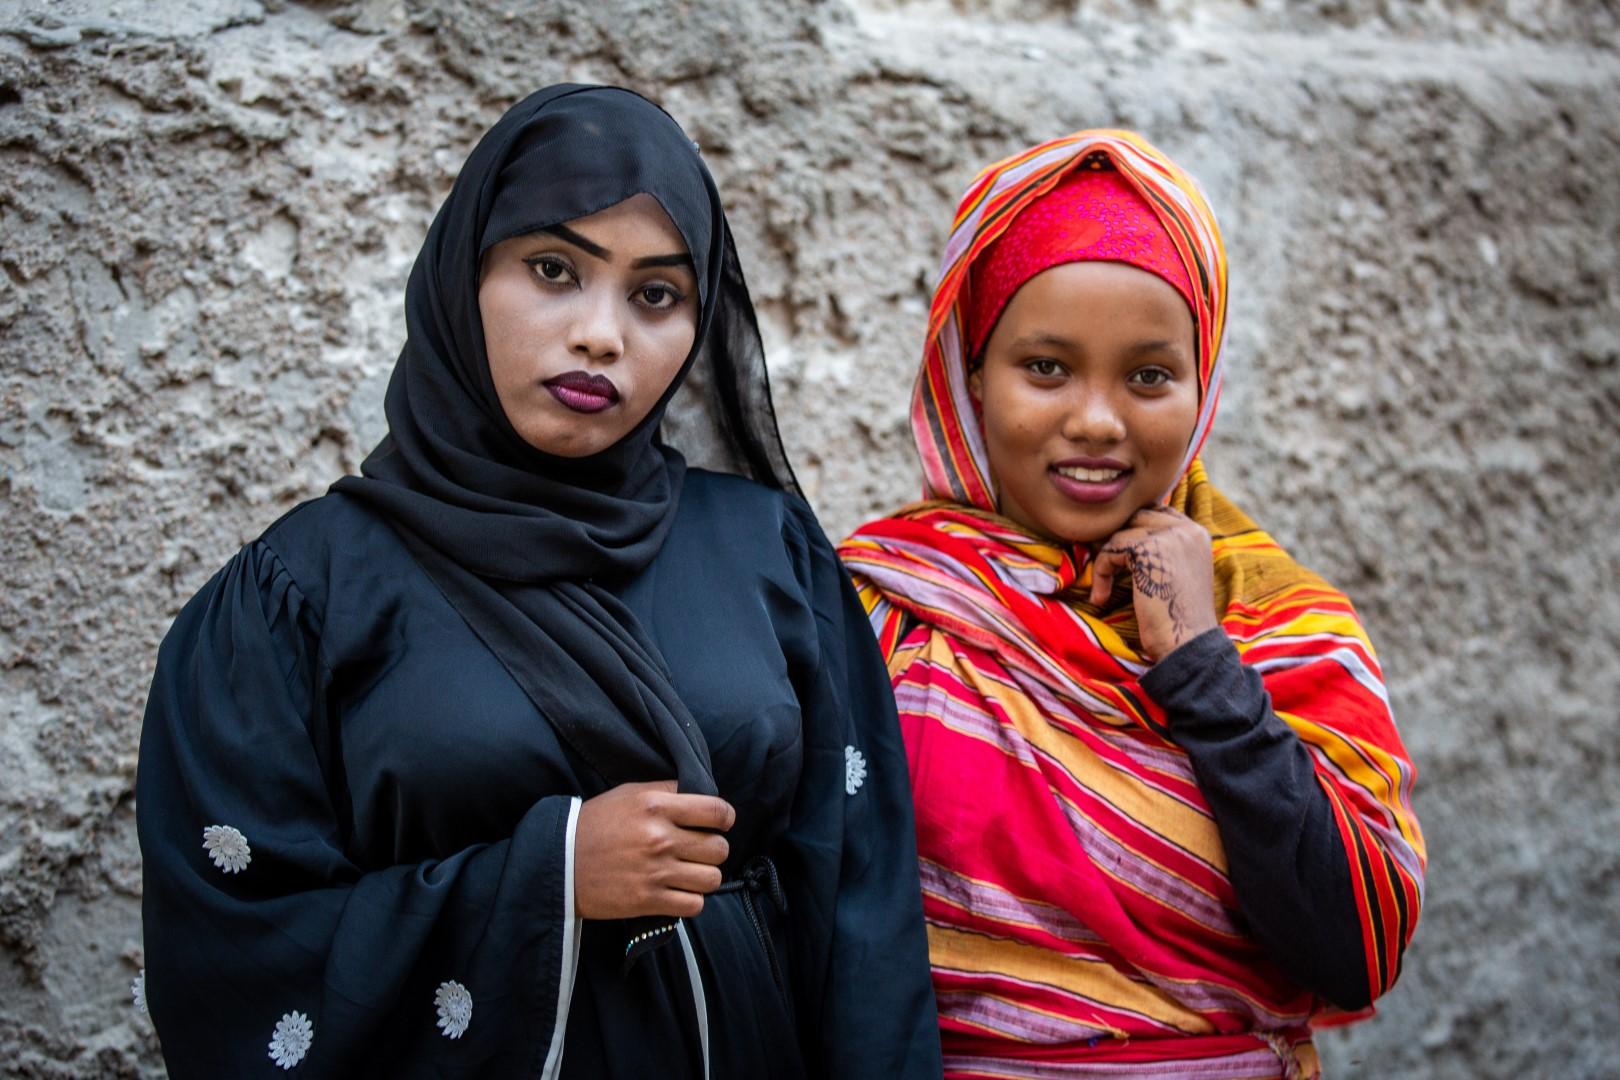 Narrow Alleys of Xamar Weyne - Naima (left) and Safia (right) pose for a photo in Xamar...